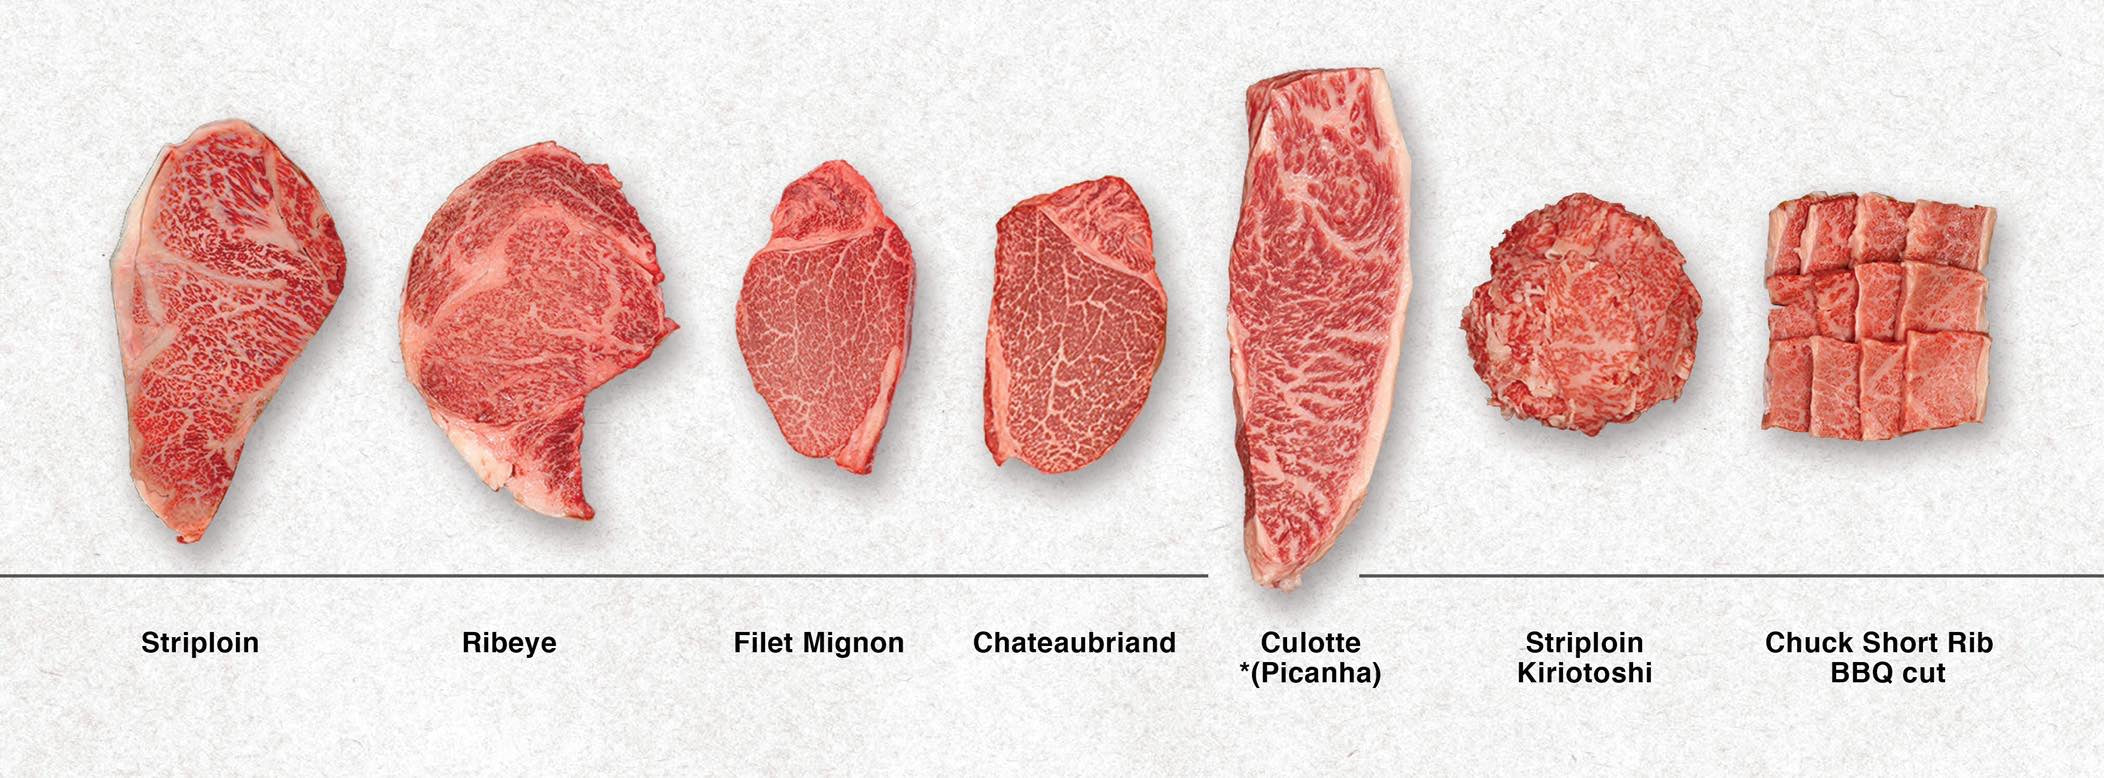 The Most Common Steak Cuts, From Worst to Best – WagyuWeTrust